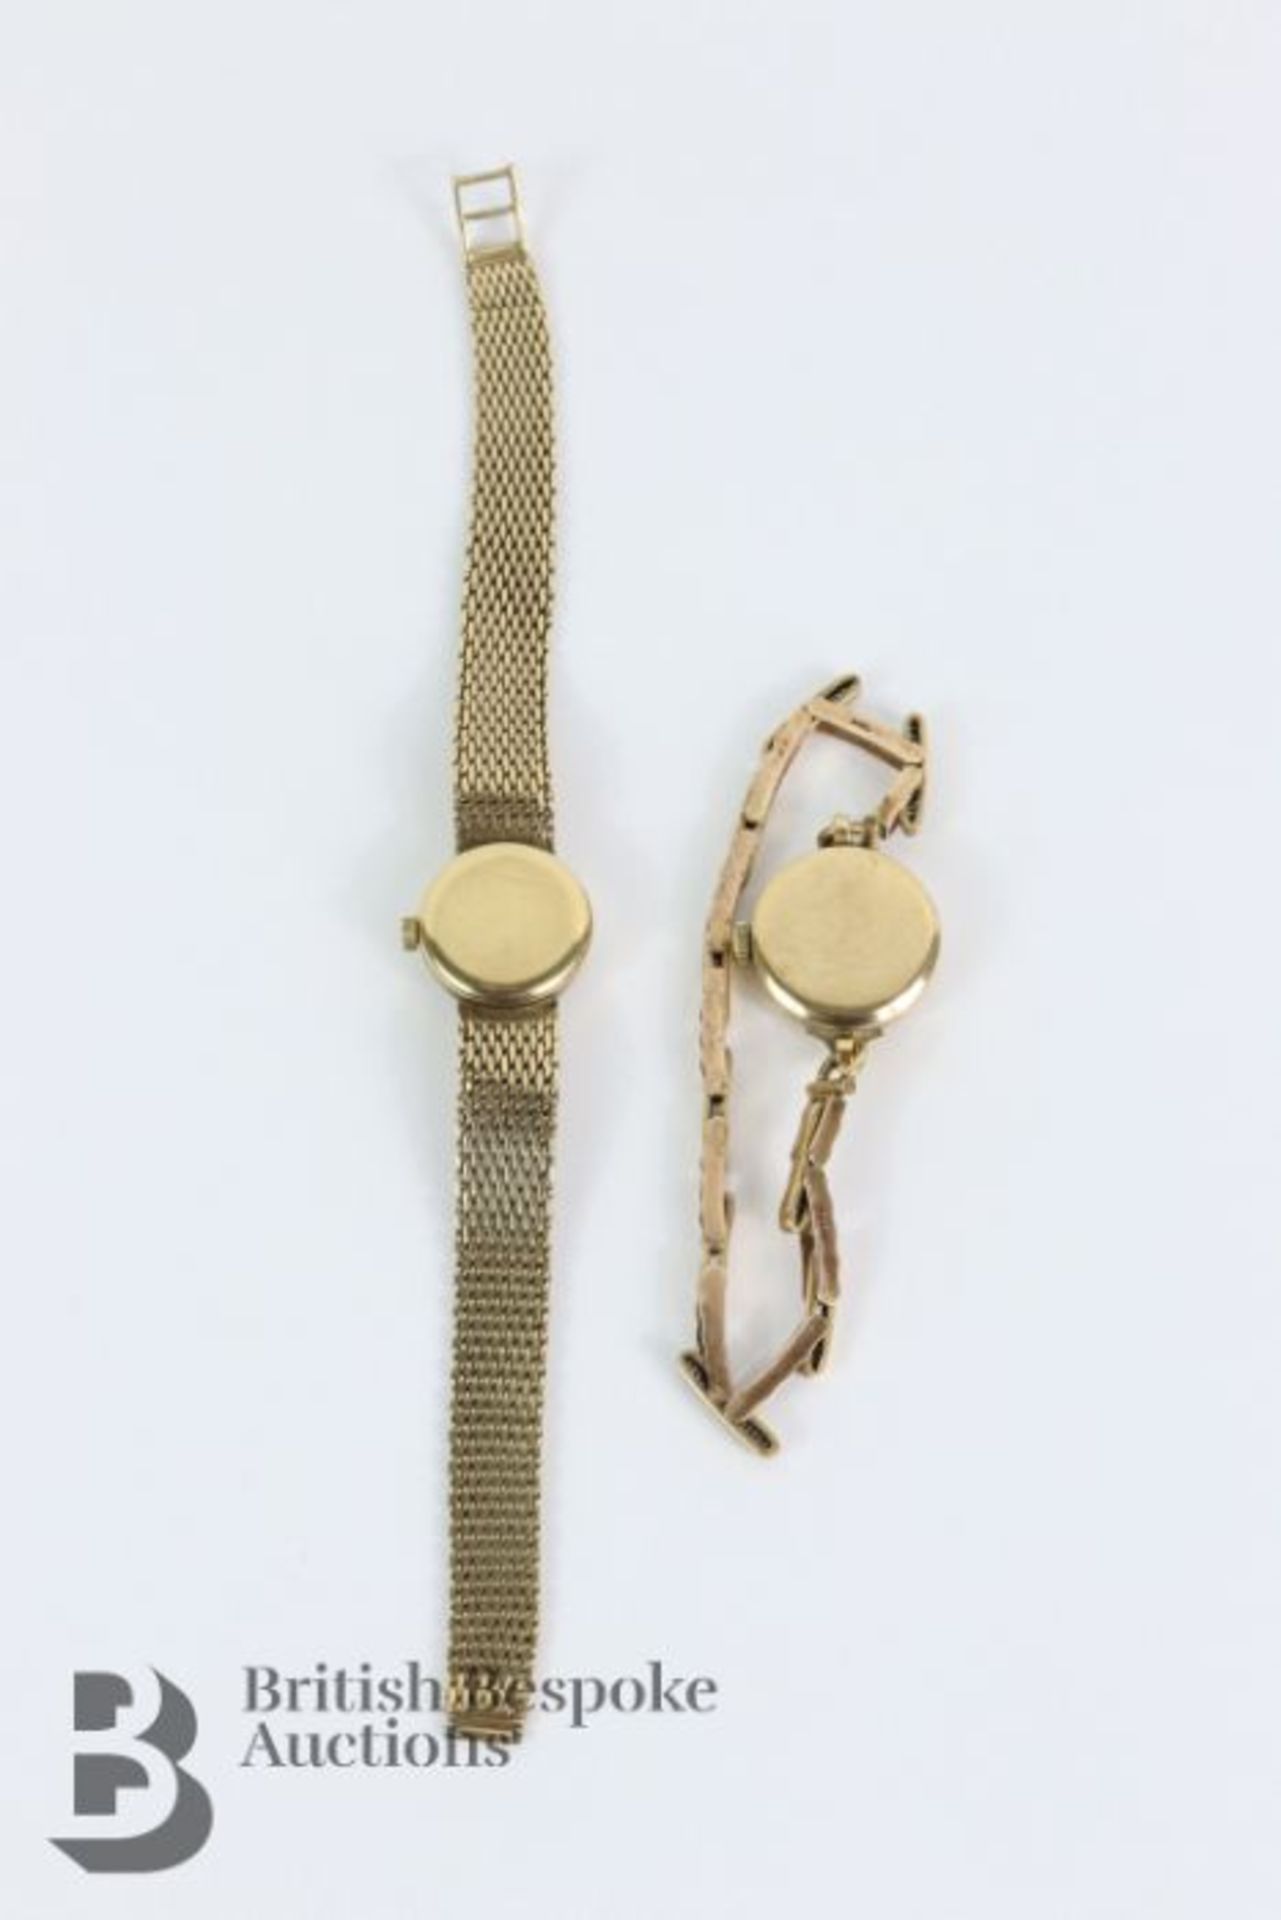 Lady's 9ct Gold Hefik Cocktail Watch - Image 2 of 3